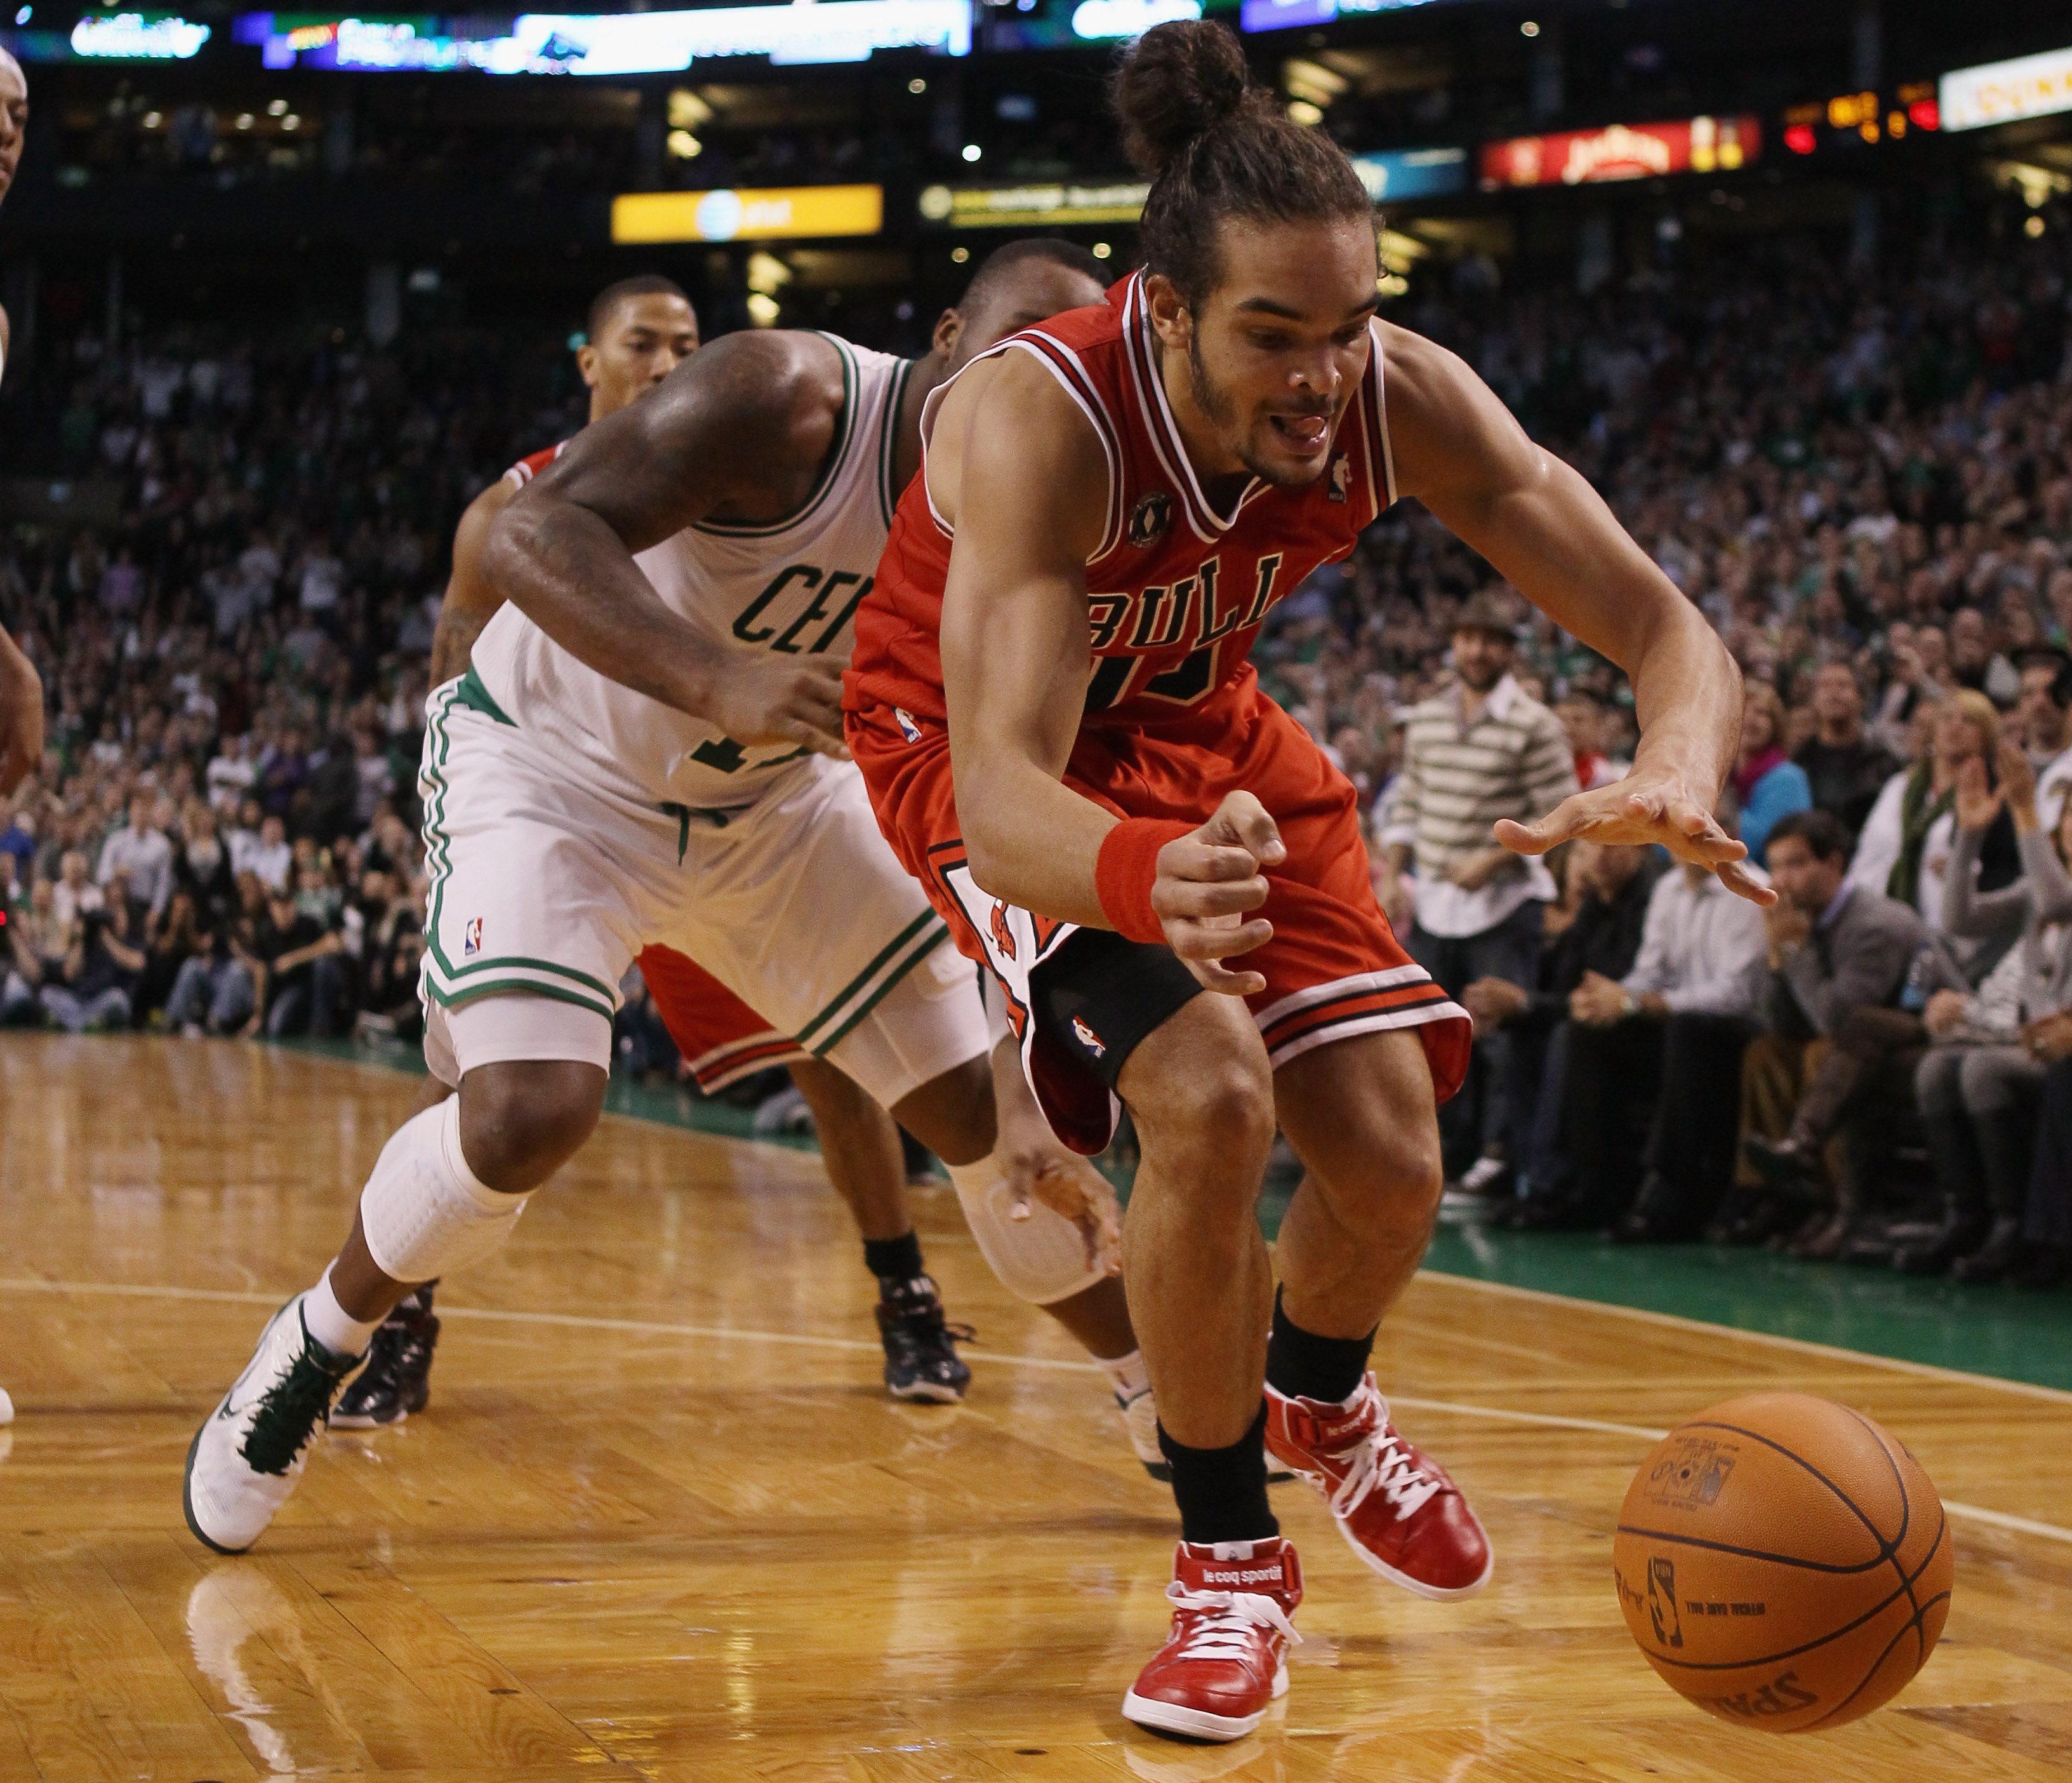 BOSTON - NOVEMBER 05:  Joakim Noah #13 of the Chicago Bulls and Glen Davis #11 of the Boston Celtics chase after a loose ball on November 5, 2010 at the TD Garden in Boston, Massachusetts. The Celtics defeated the Bulls 110-105 in overtime. NOTE TO USER: